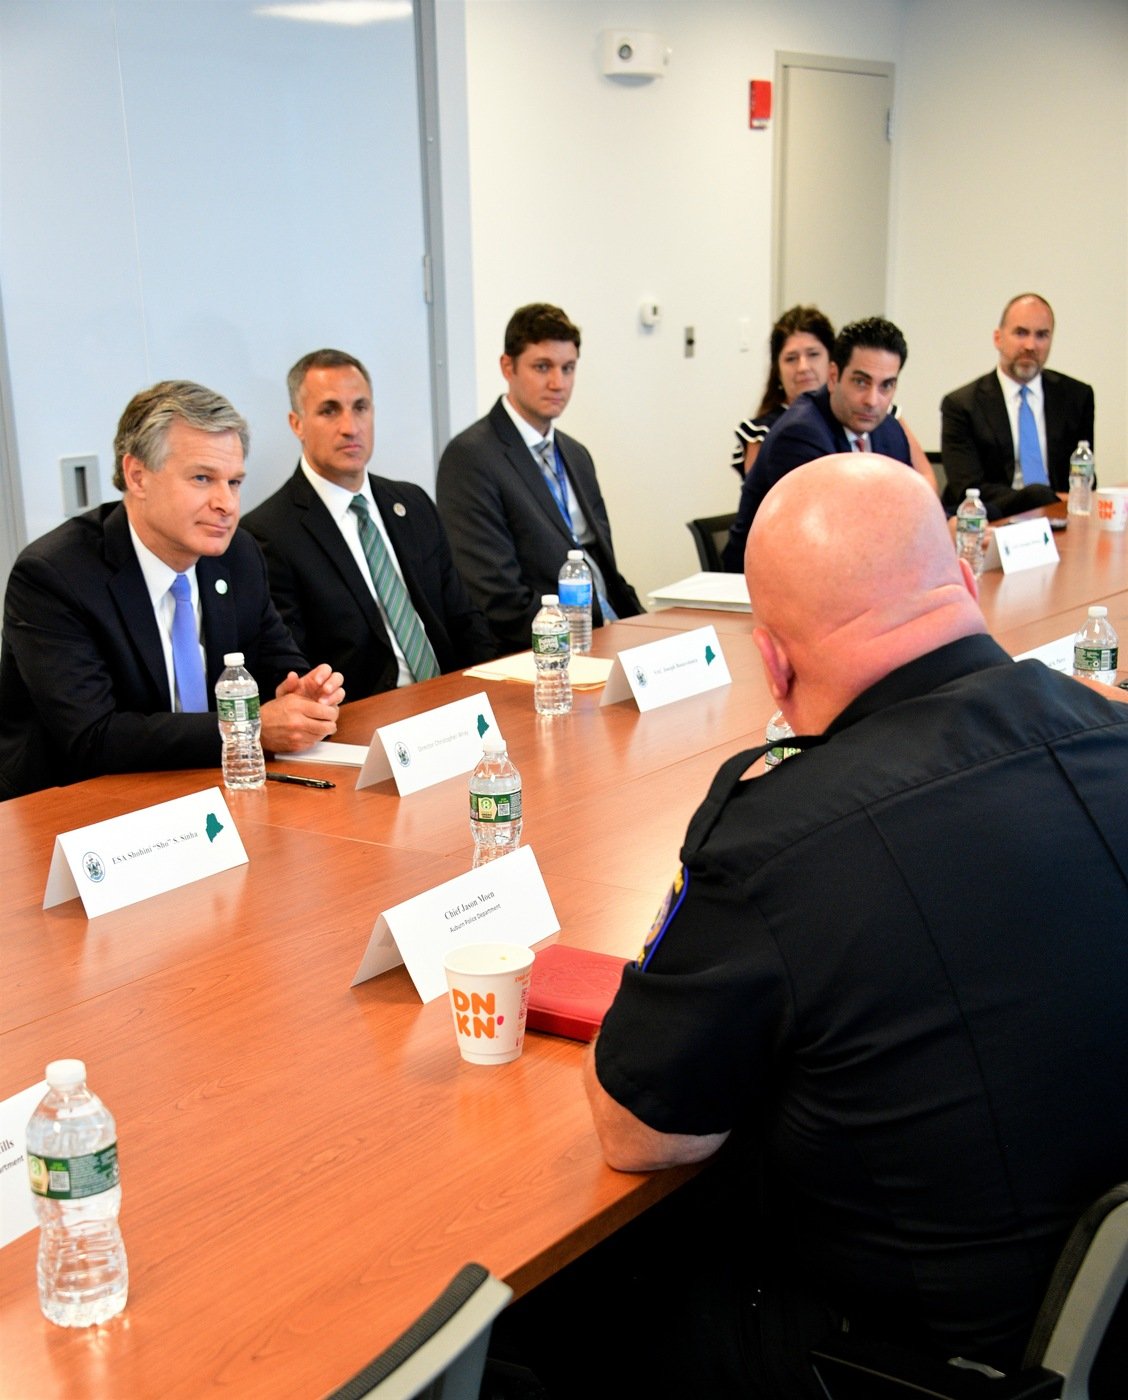 Director Wray Meets with Law Enforcement Partners in Maine